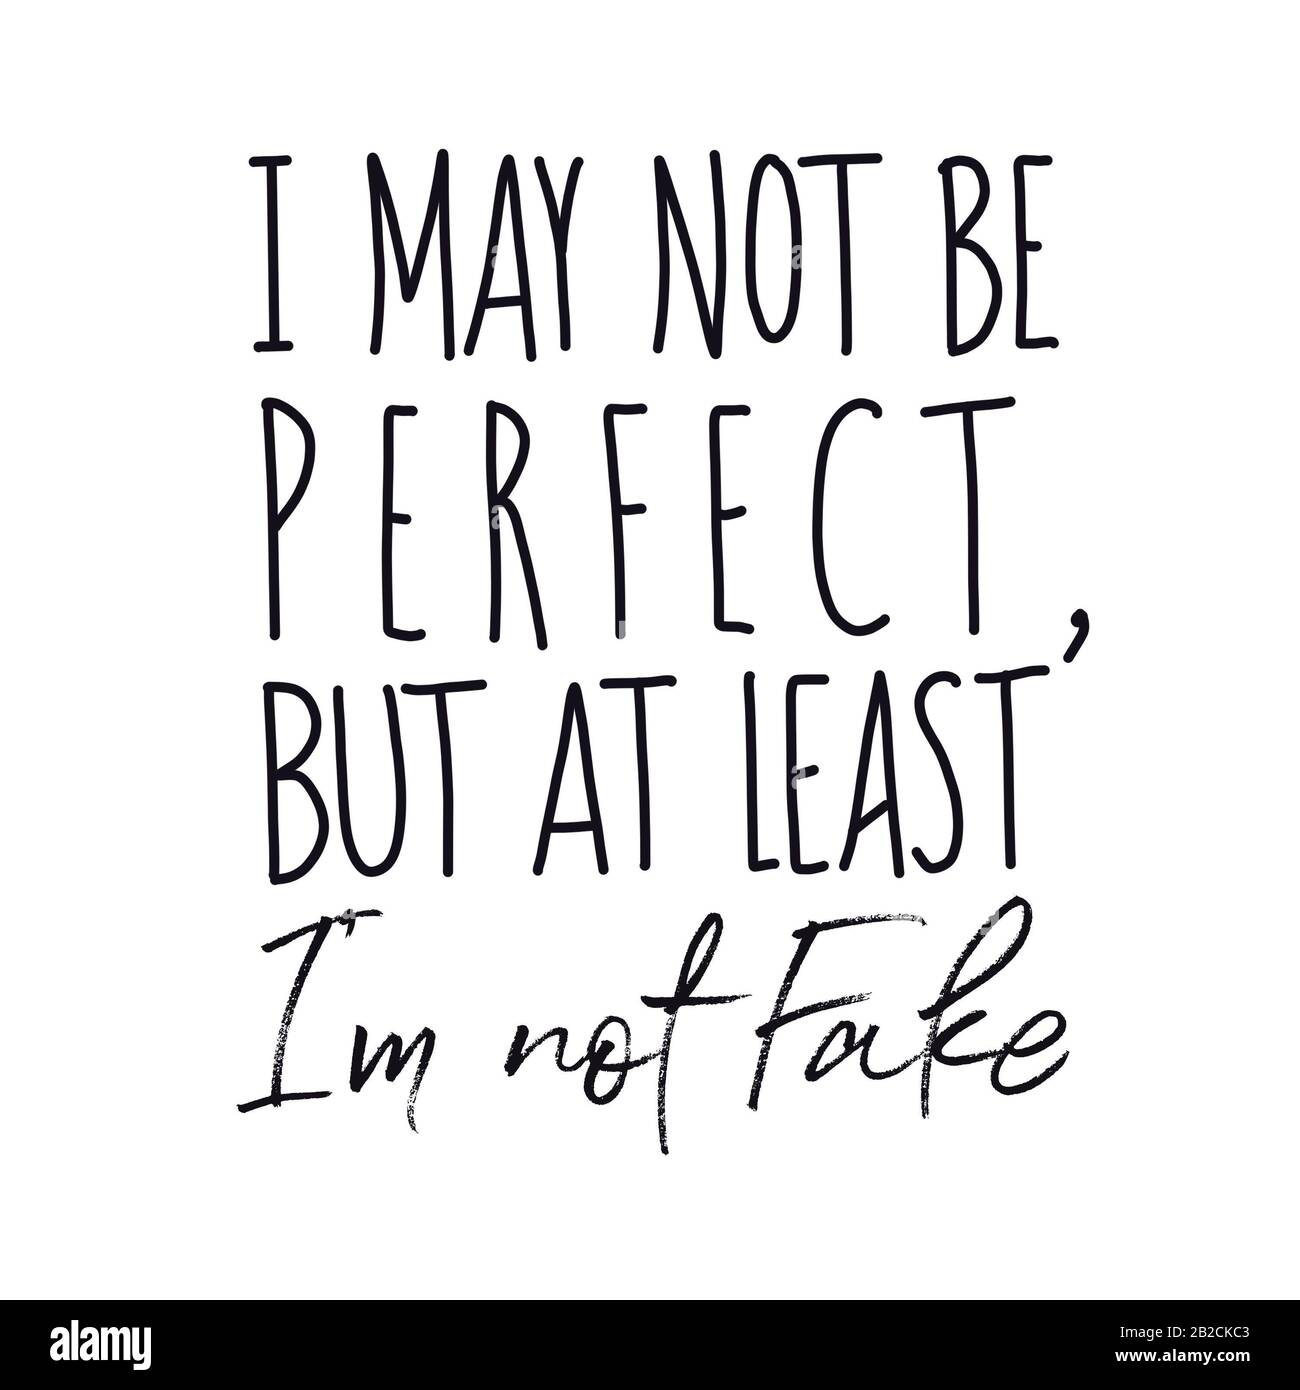 Inspirational Quote - I may not be perfect but at least i'm not fake with white background Stock Photo